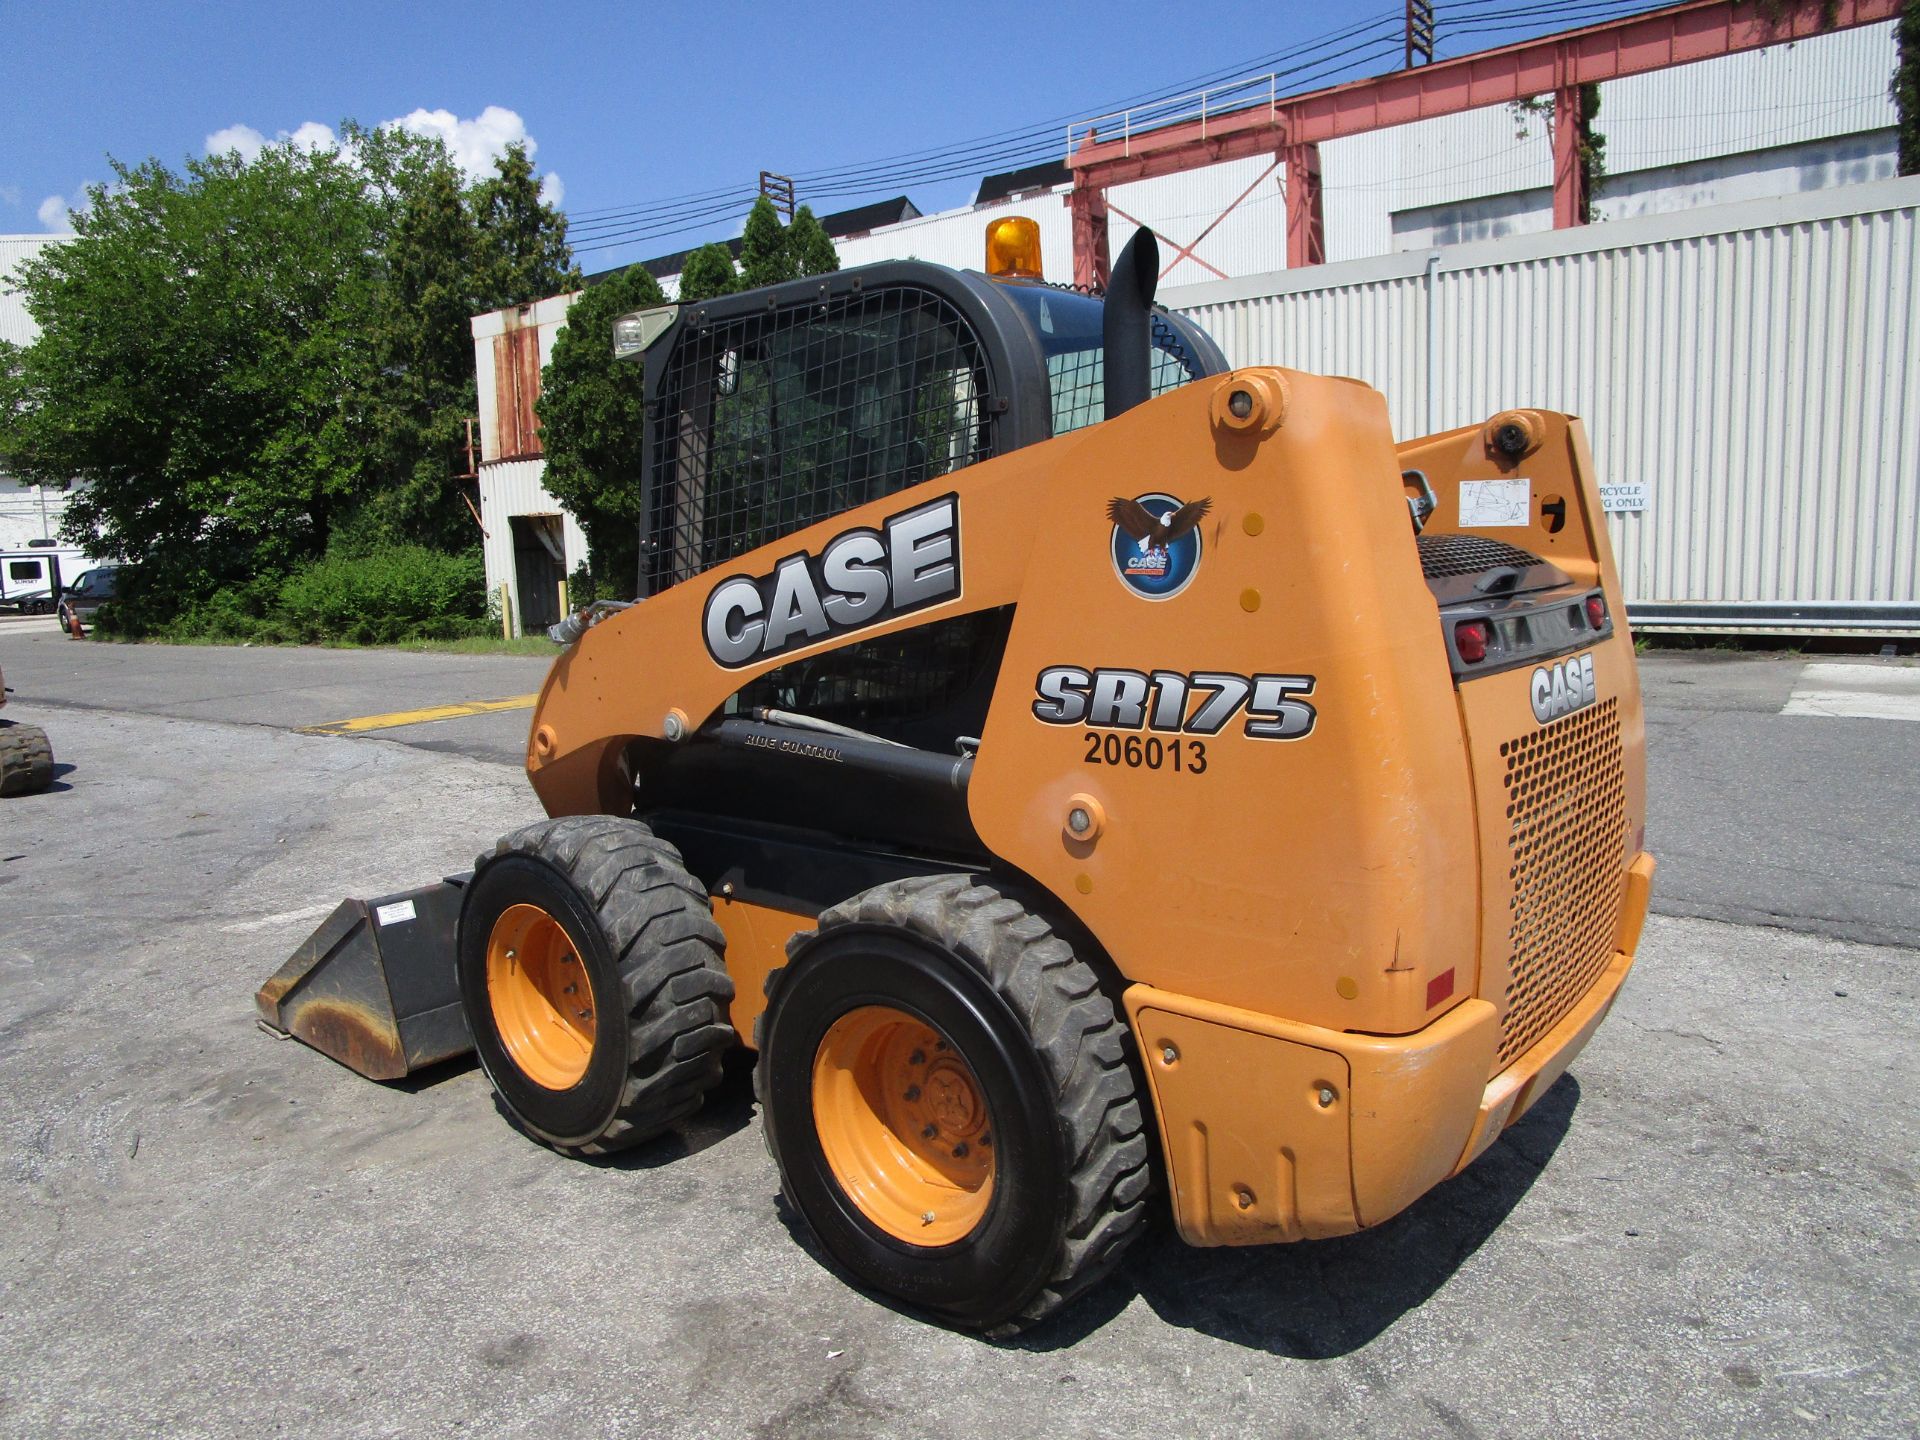 2012 Case SR175 High-Flow Skid Steer Loader -Low Hours Enclosed Cab Located in Lester, PA - Image 3 of 12